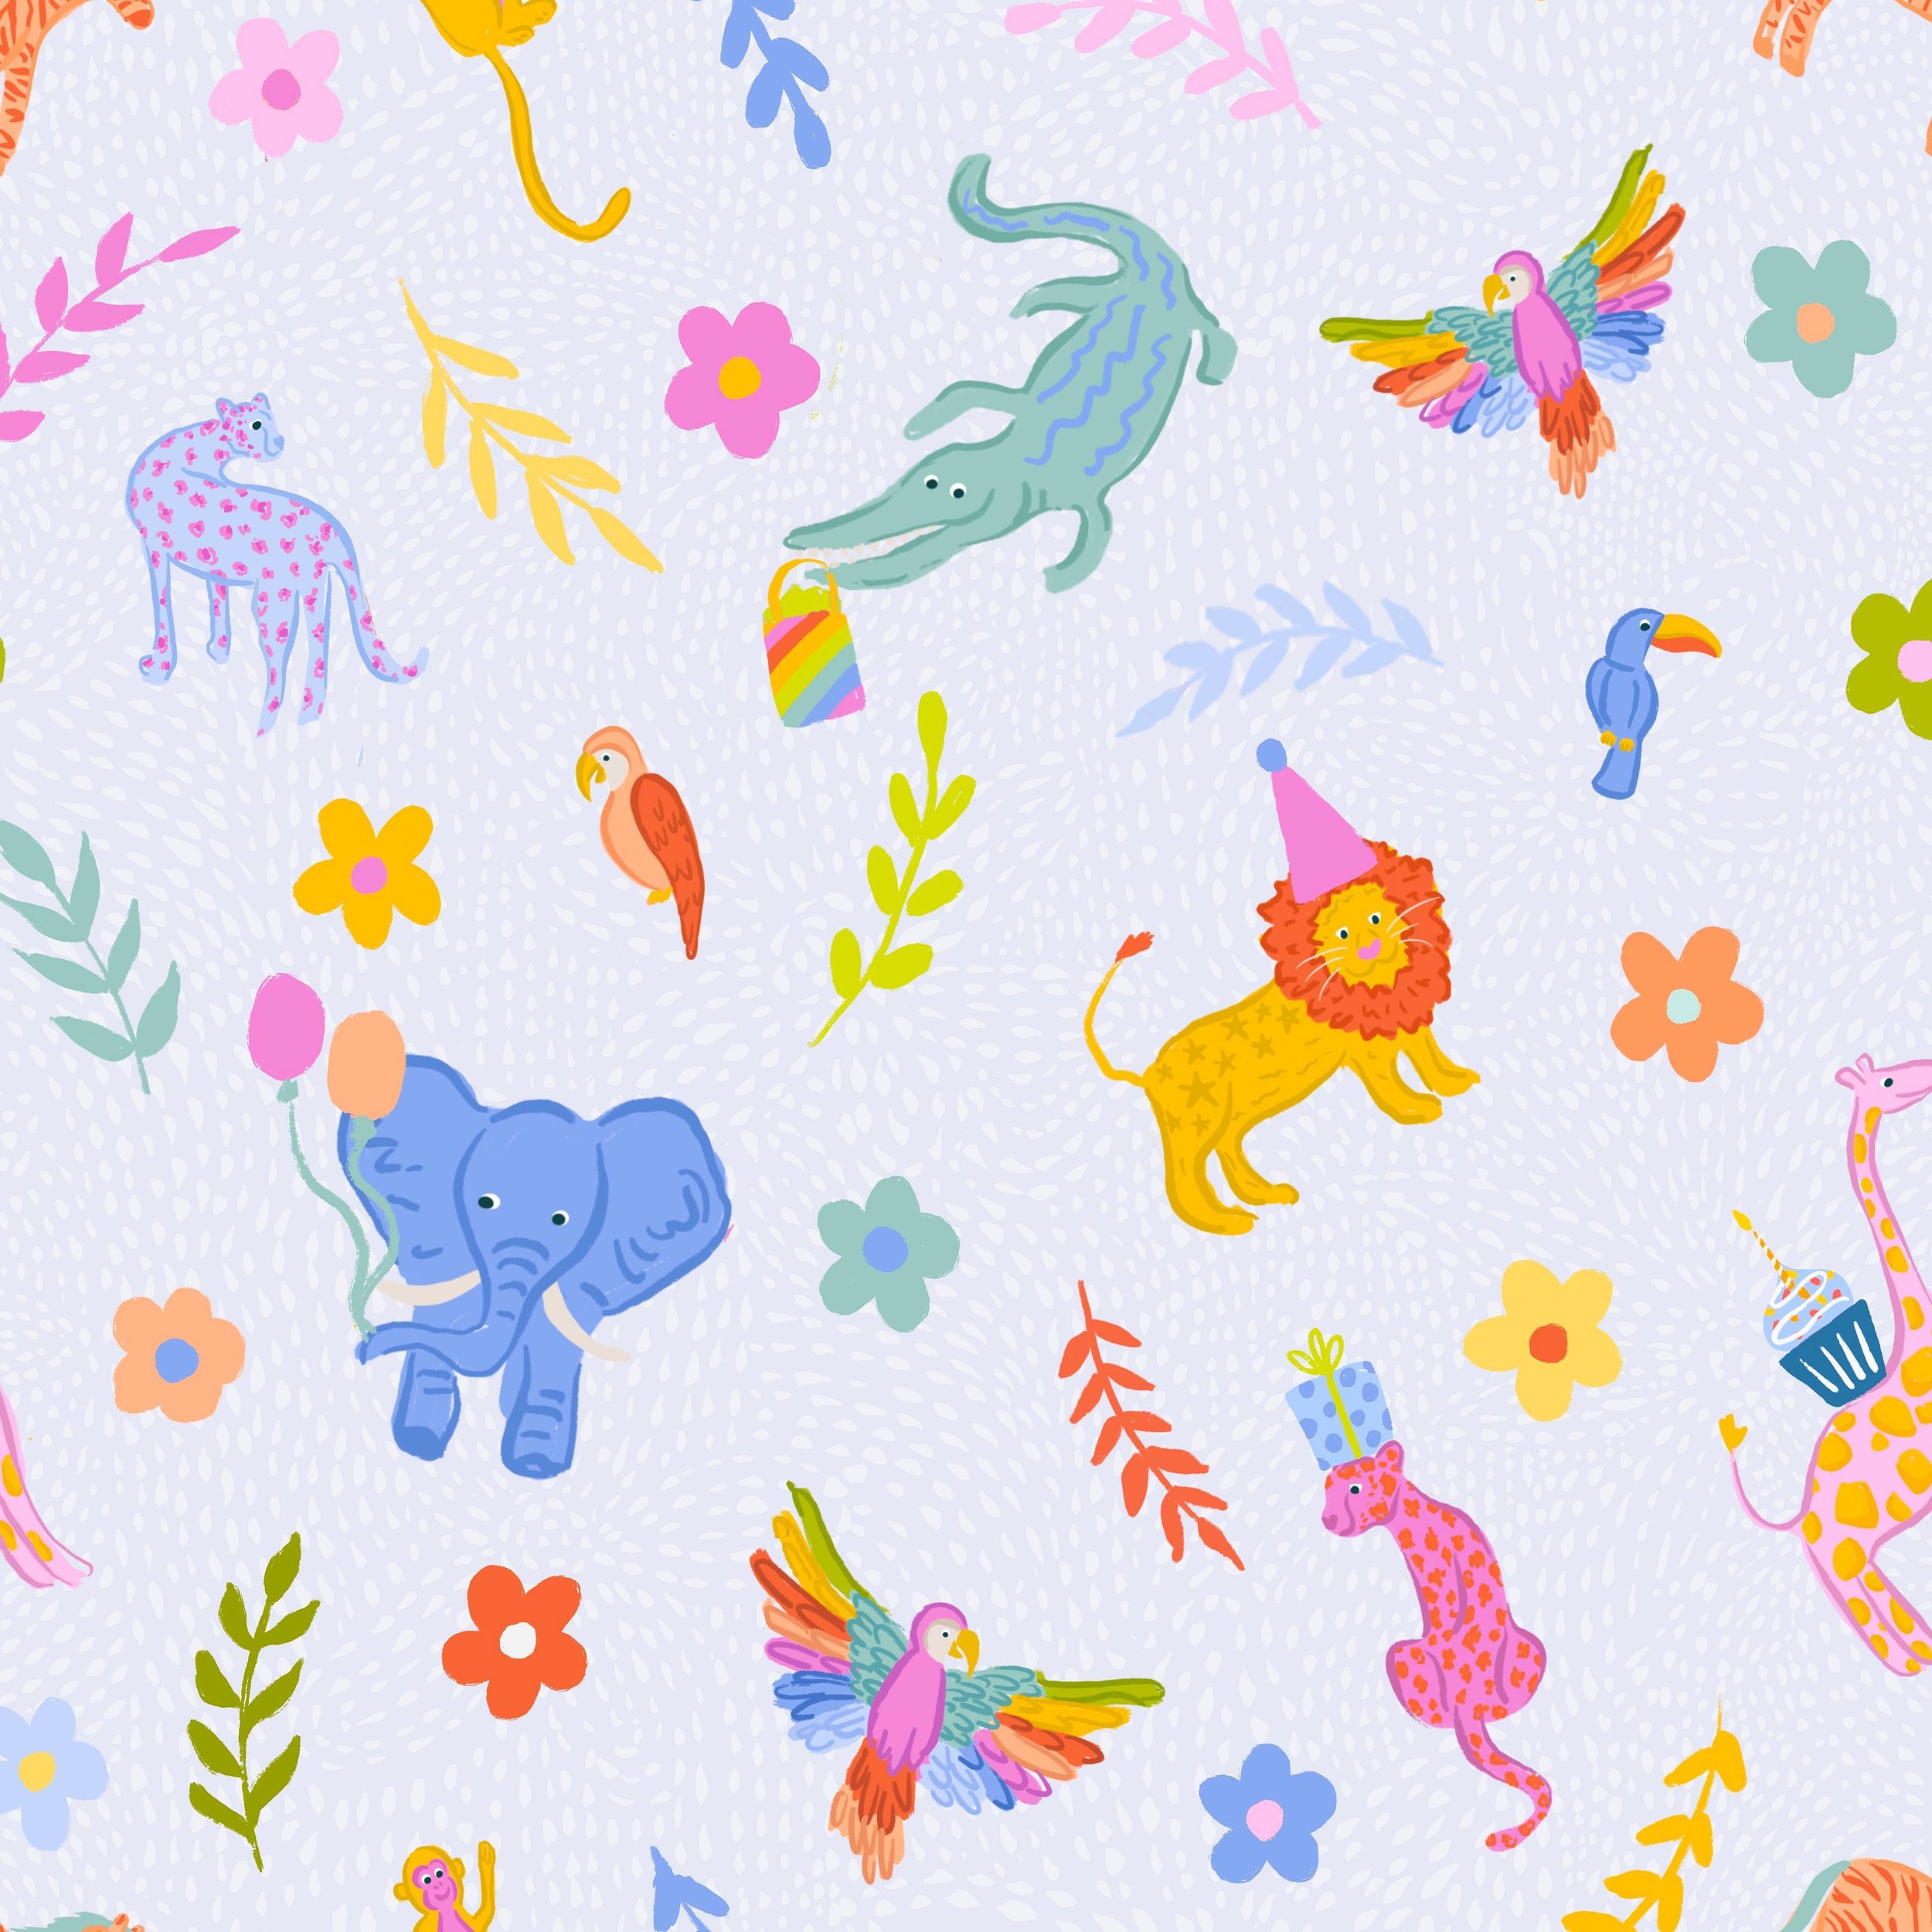 Happy Friday you party animals 💕😘🌈 

Hope you all have an amazing weekend! 
#animalpattern #safaripattern #kidspattern #colorfulpattern #birthdaypattern